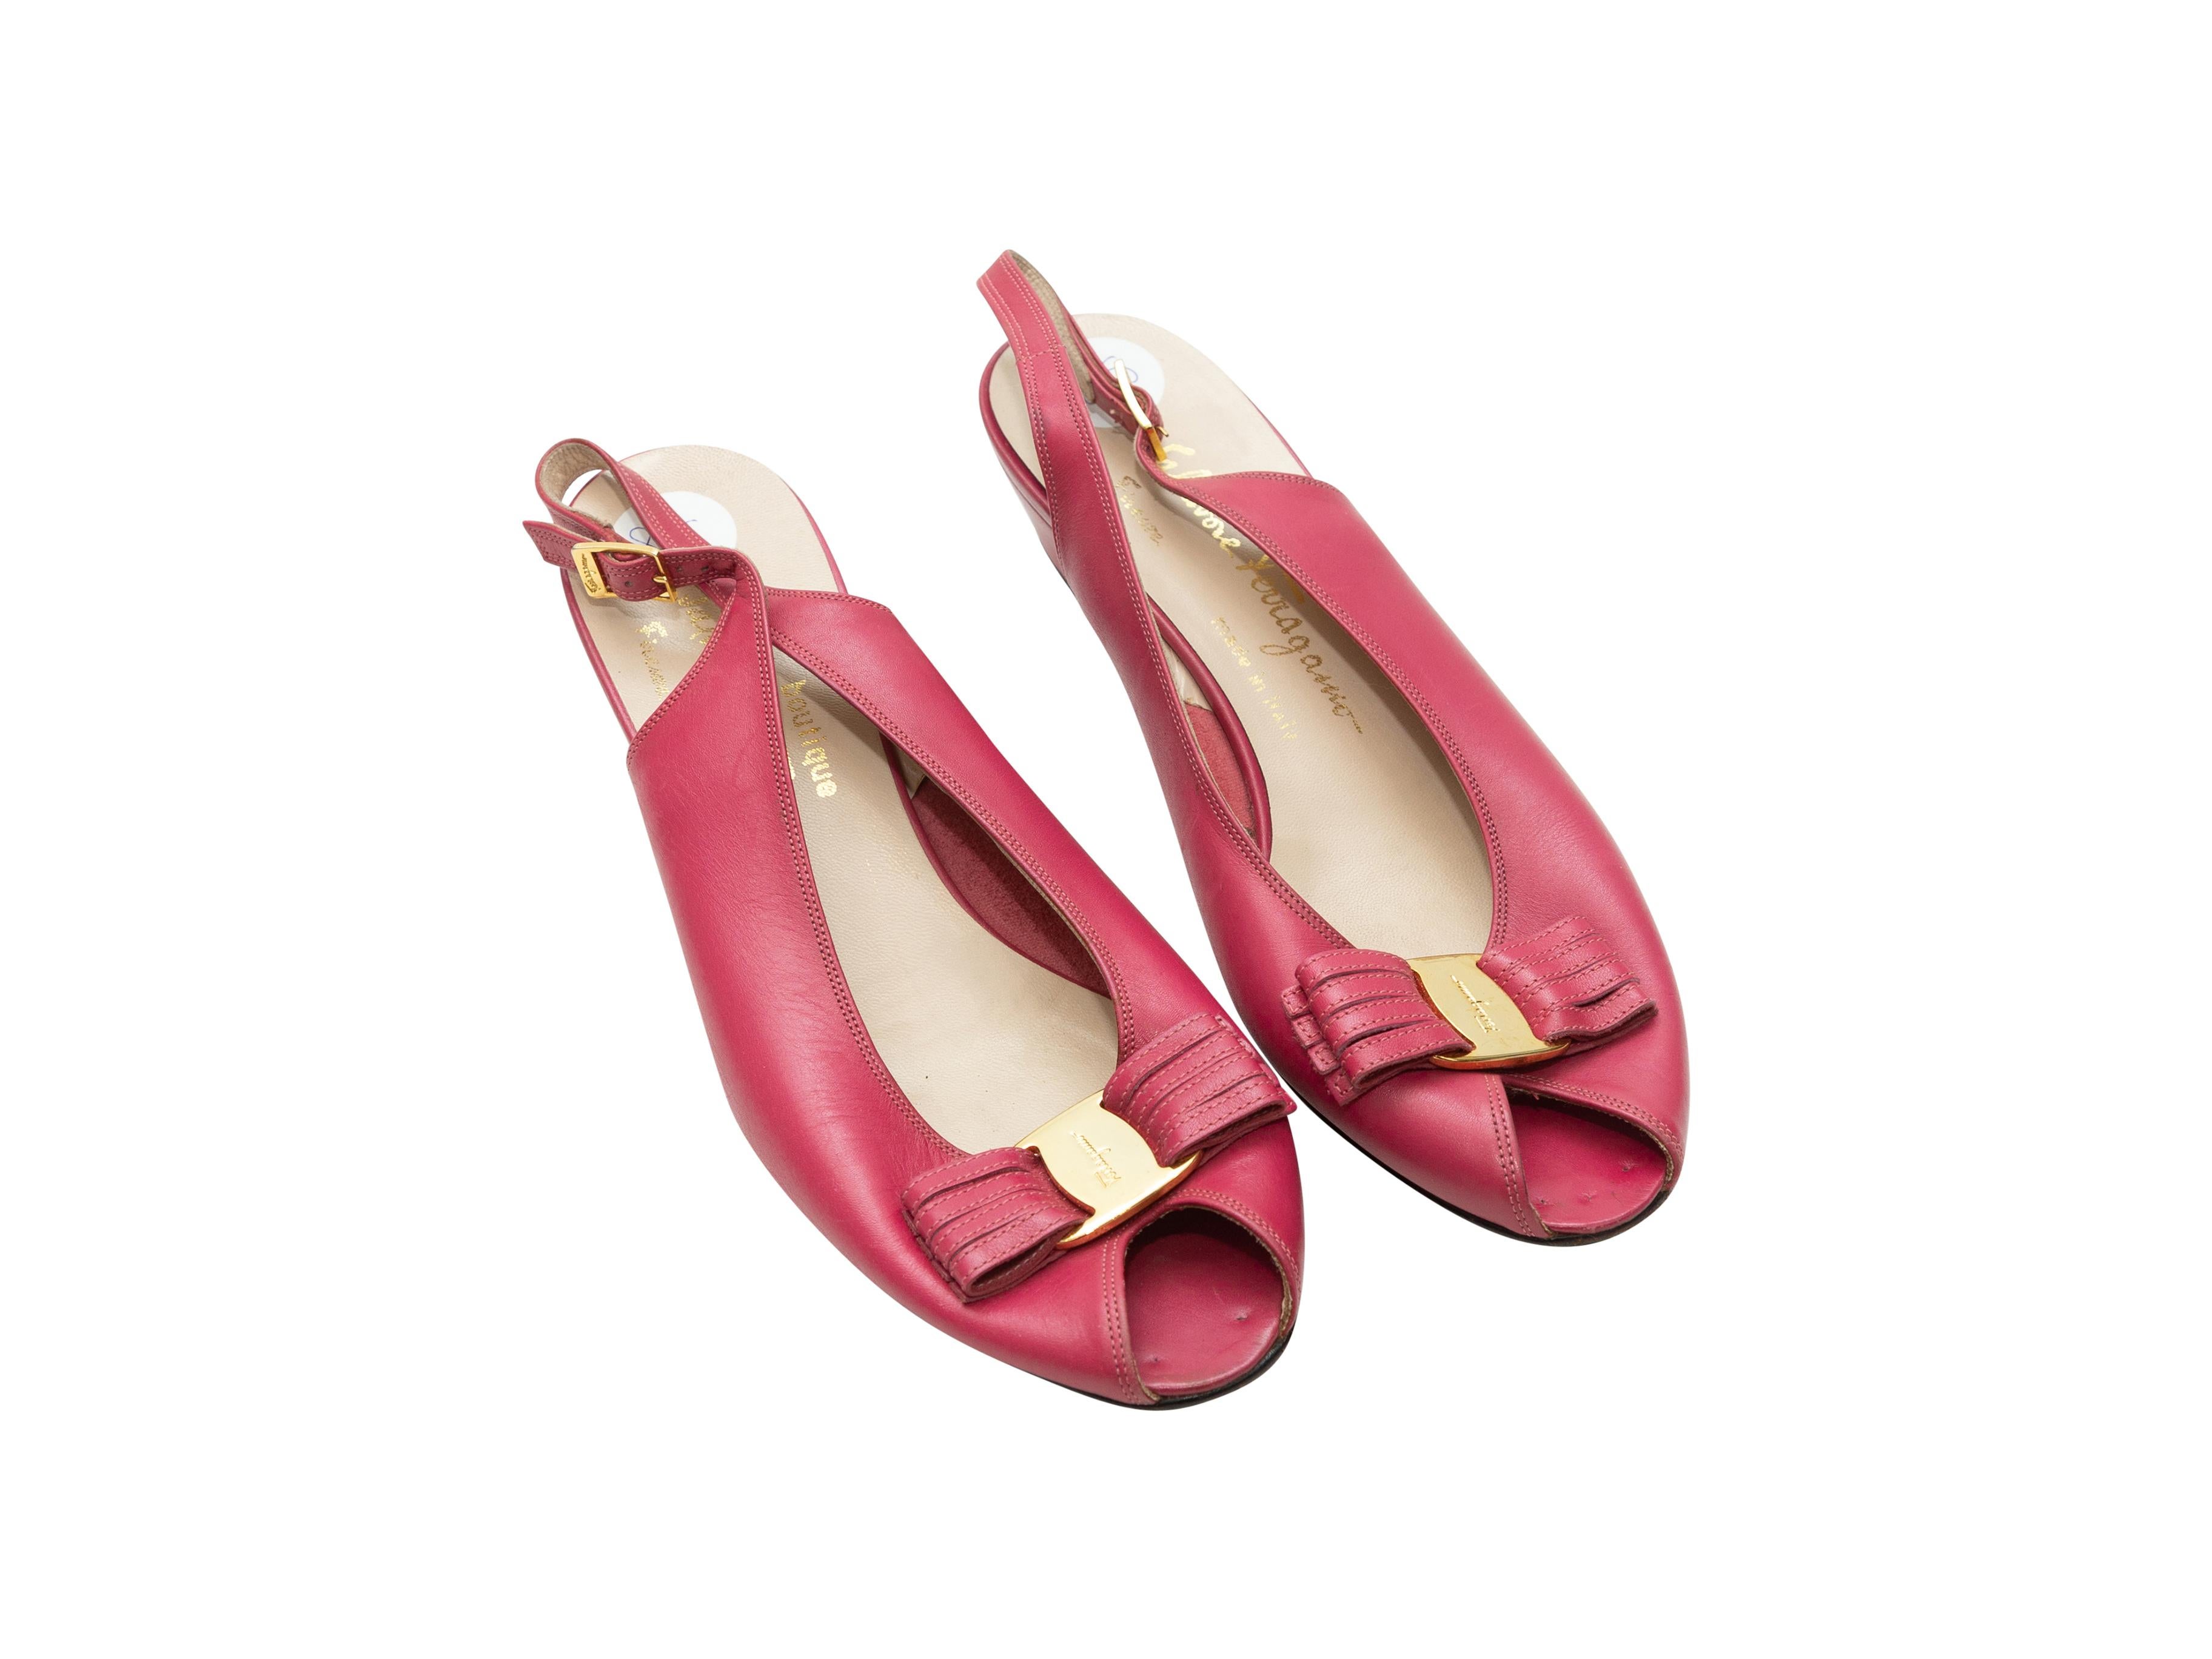 Product details: Vintage pink leather peep-toe slingback pumps by Salvatore Ferragamo. Gold-tone hardware. Bow accents at tops. Buckle closures at straps. 1.5